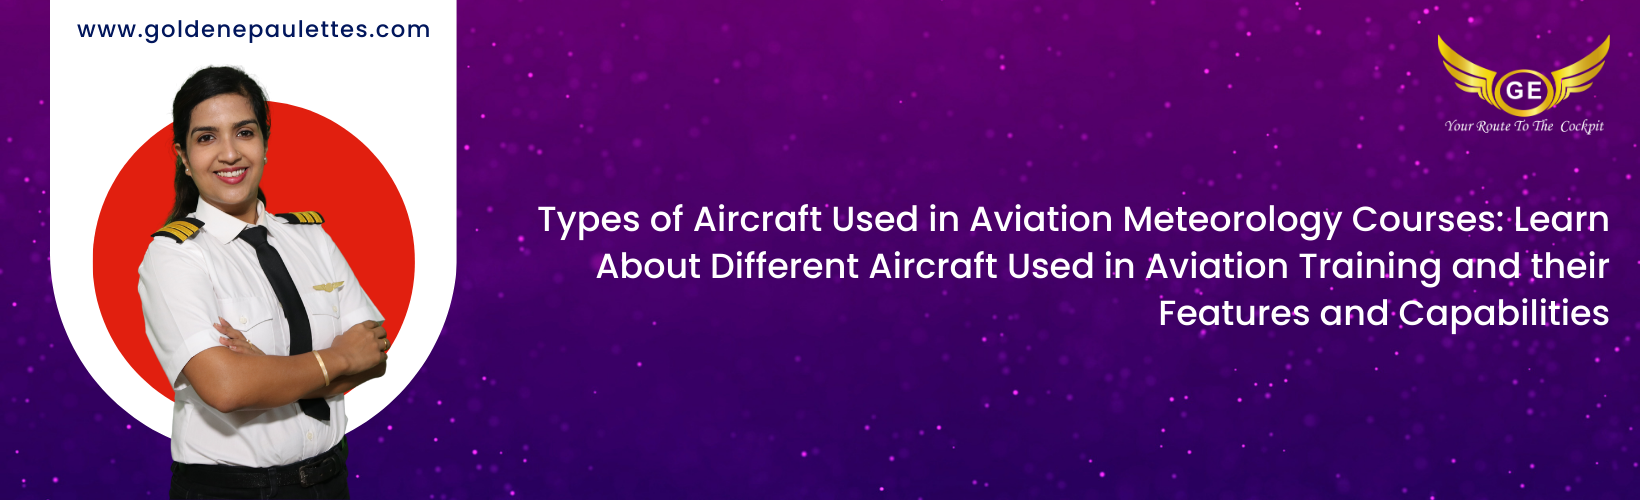 Types of Aircraft Used in Aviation Meteorology Courses